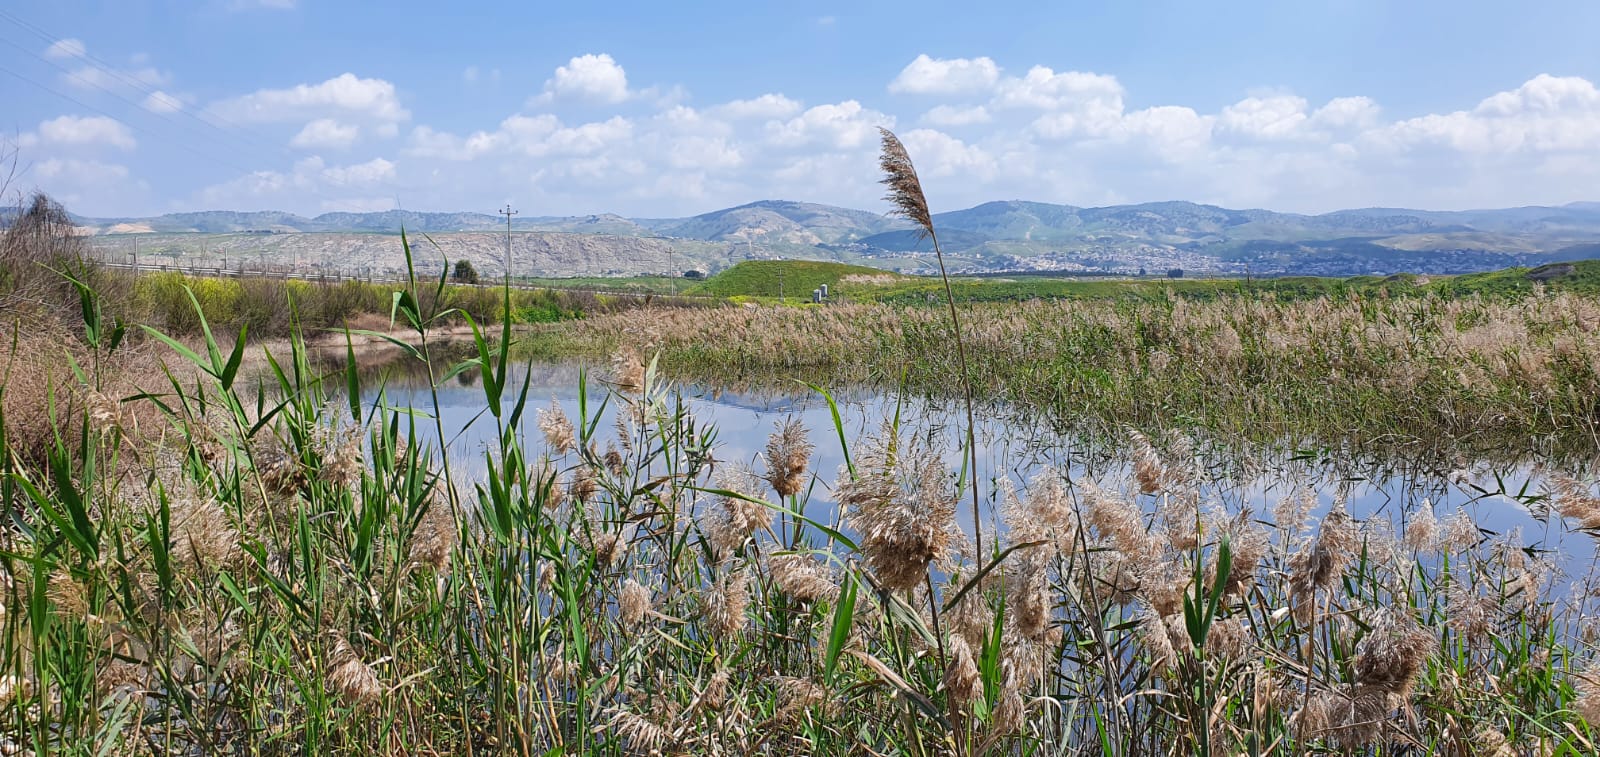 The first Israeli fishpond to undergo rewilding by the Society for the Protection of Nature in Israel, and to be tested as a basis for carbon credits by Terrra, Kfar Ruppin, March 27, 2022. (Shai Ben Aharon)